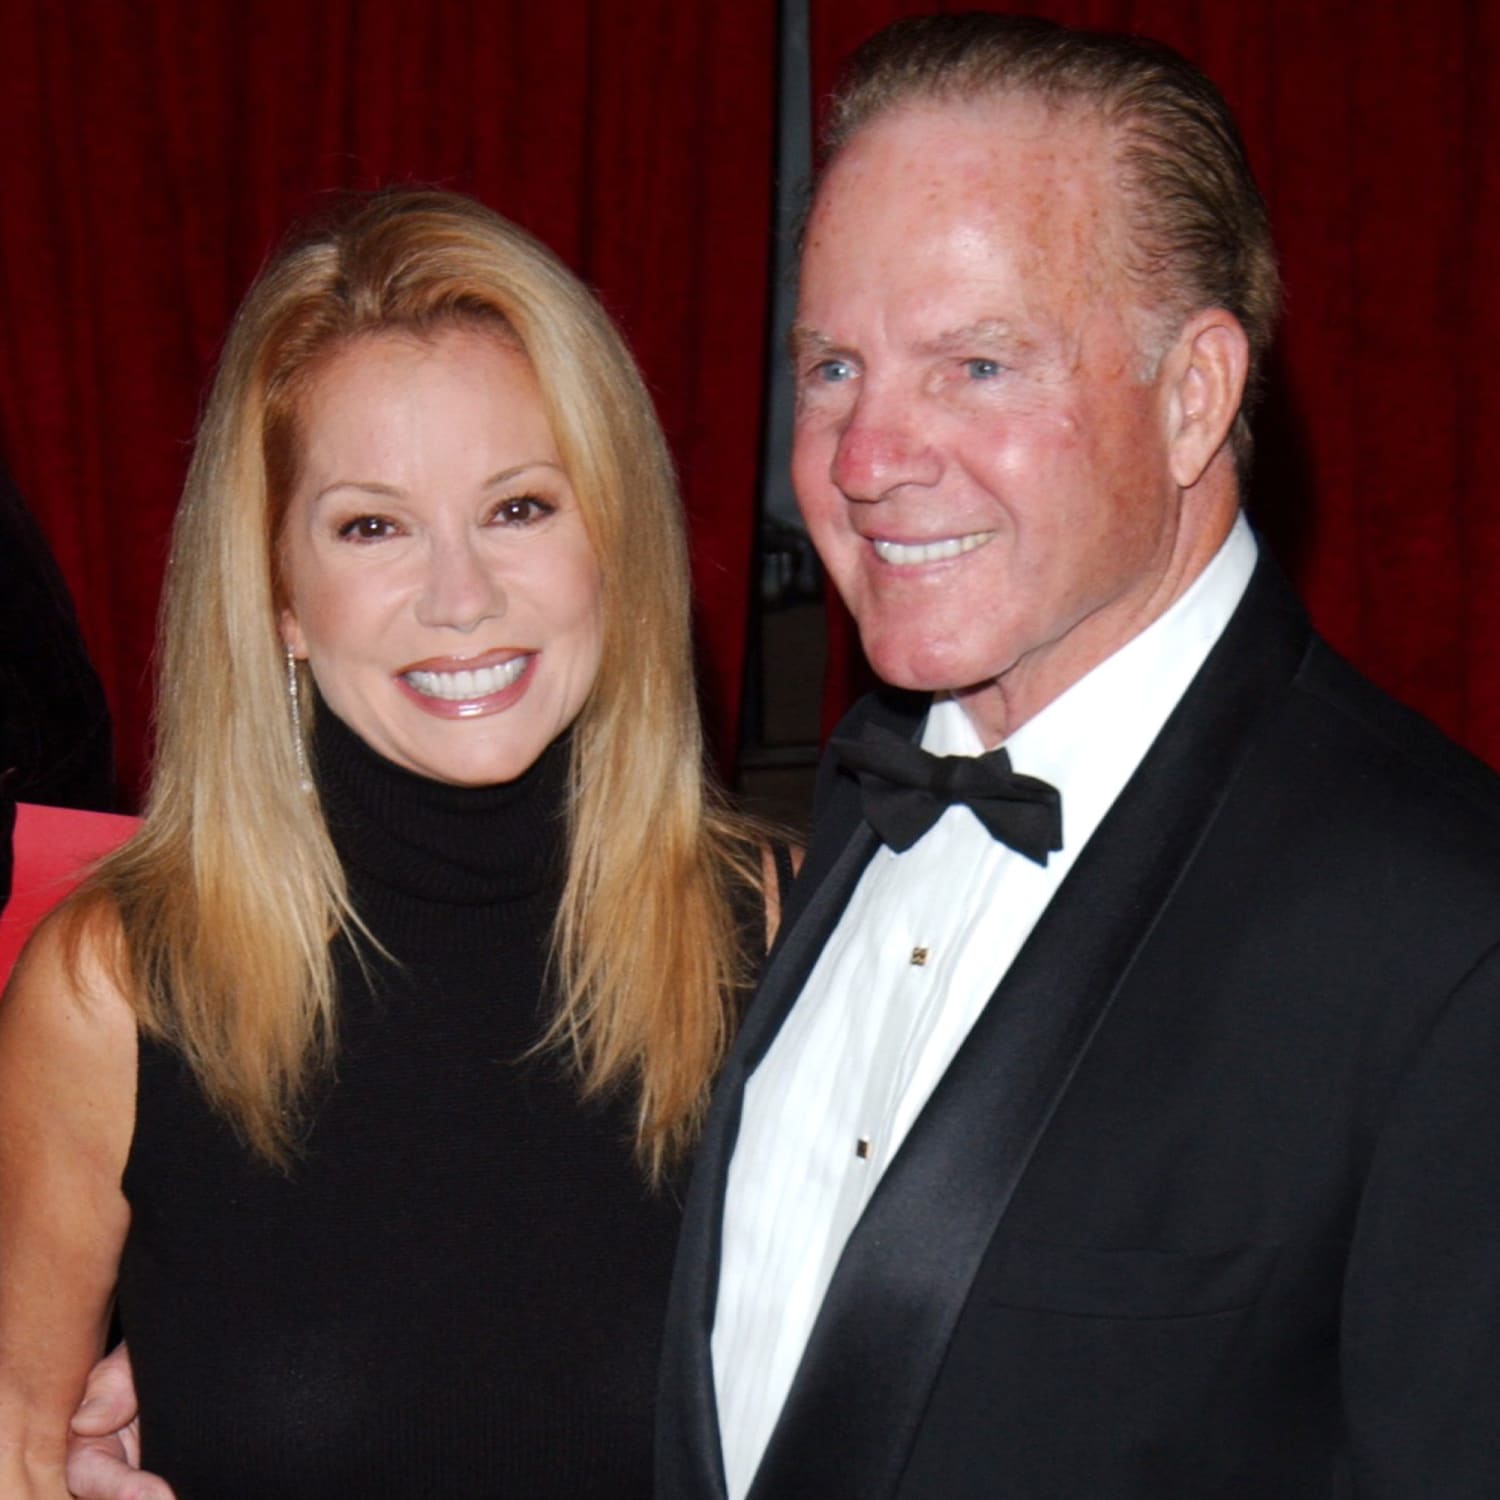 Kathie Lee Gifford reveals the moment she knew she wanted to marry Frank